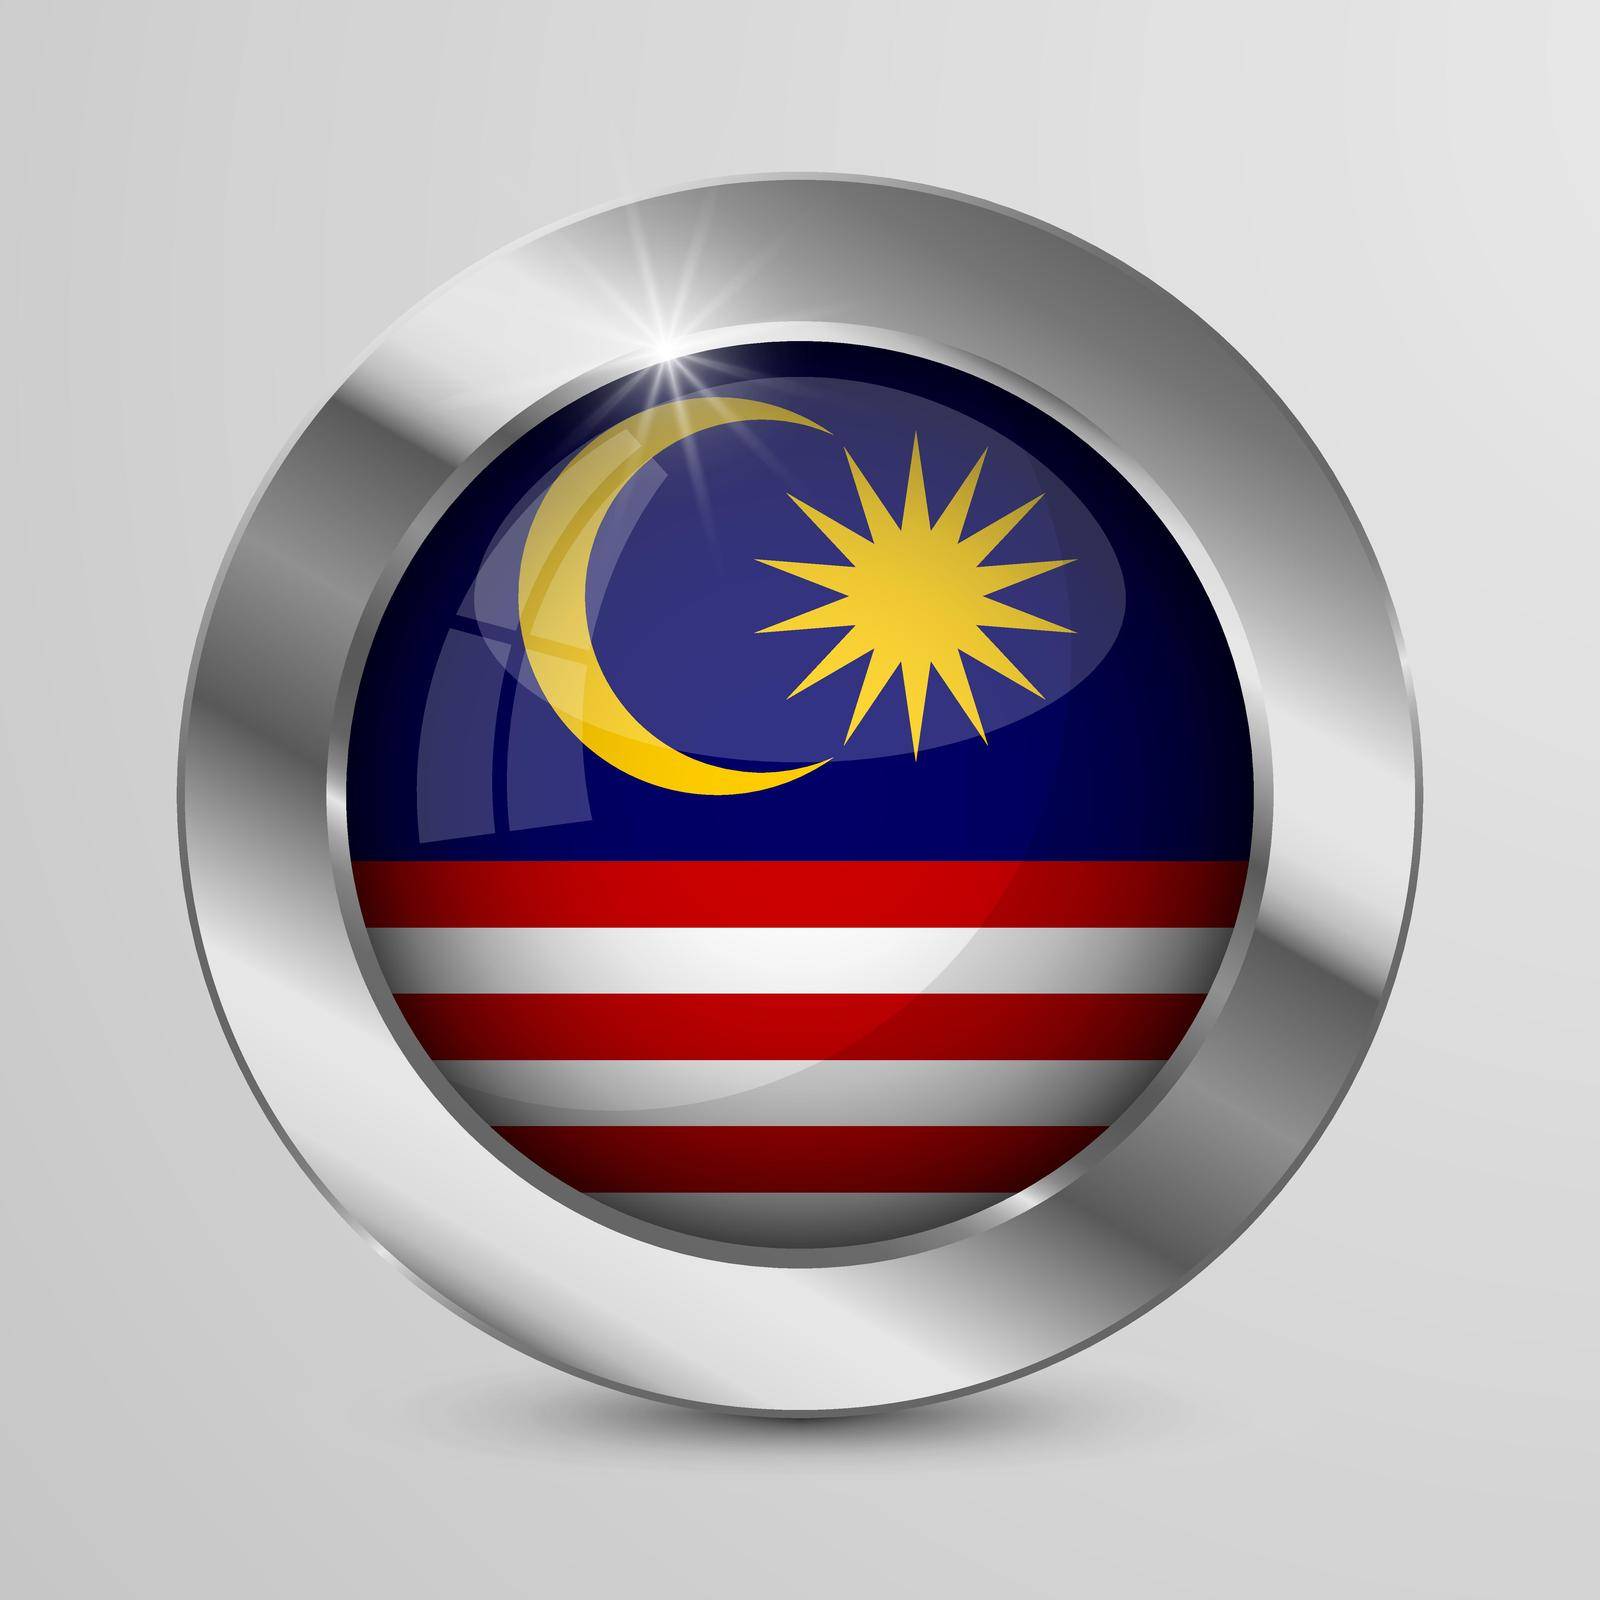 EPS10 Vector Patriotic Button with Malaysia flag colors. An element of impact for the use you want to make of it.